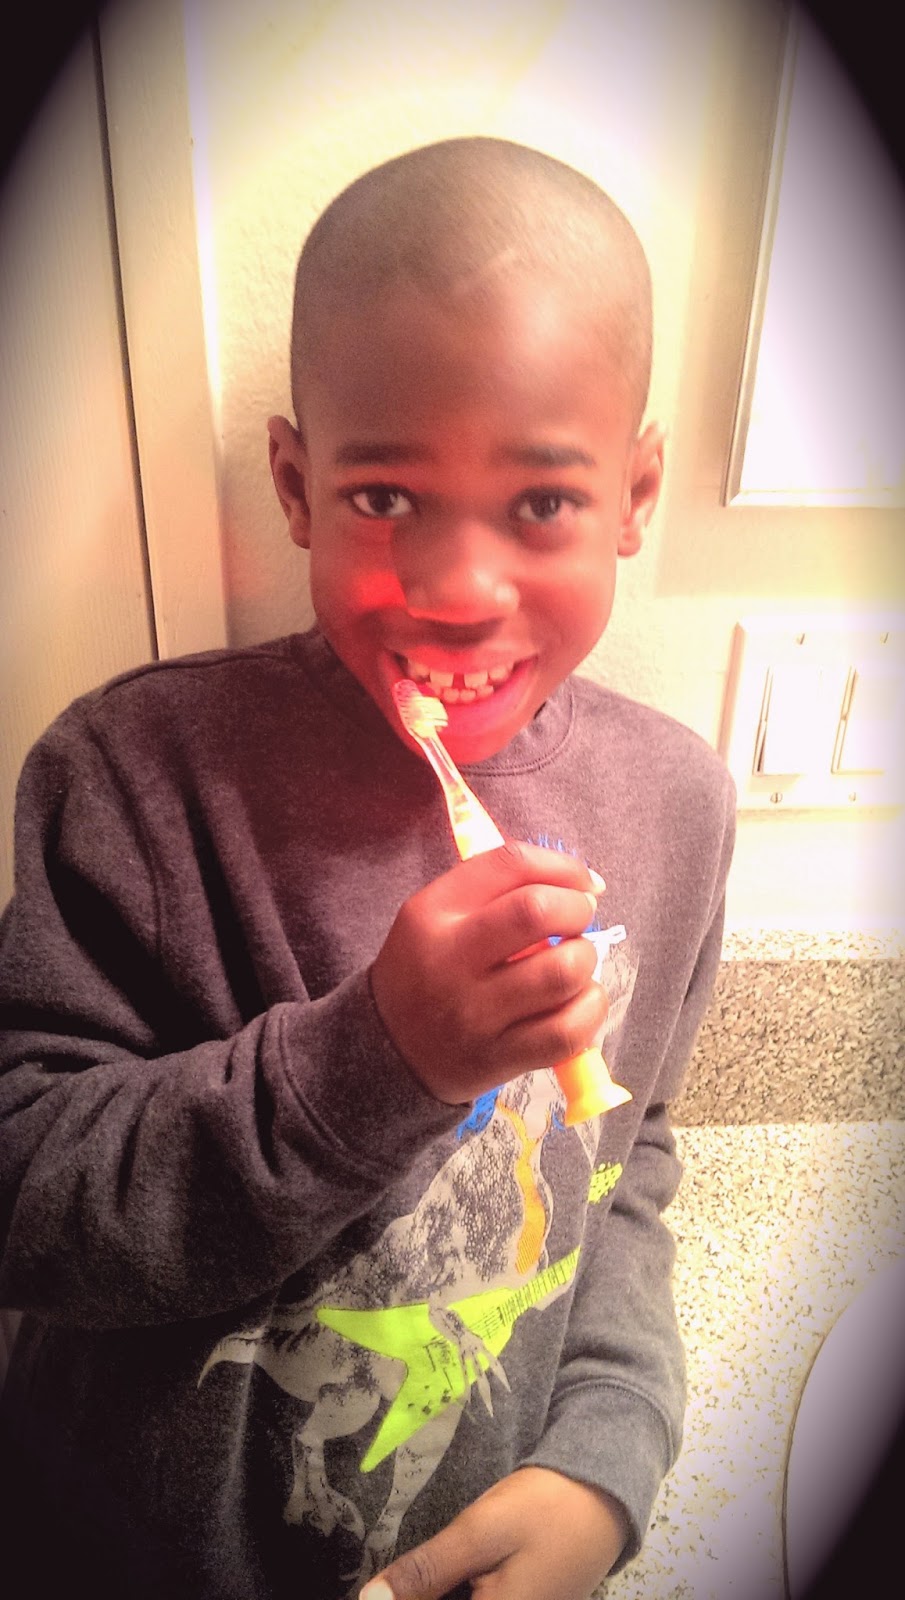 firefly+toothbrush Firefly Toothbrush Review - Best Children's Electric Toothbrush